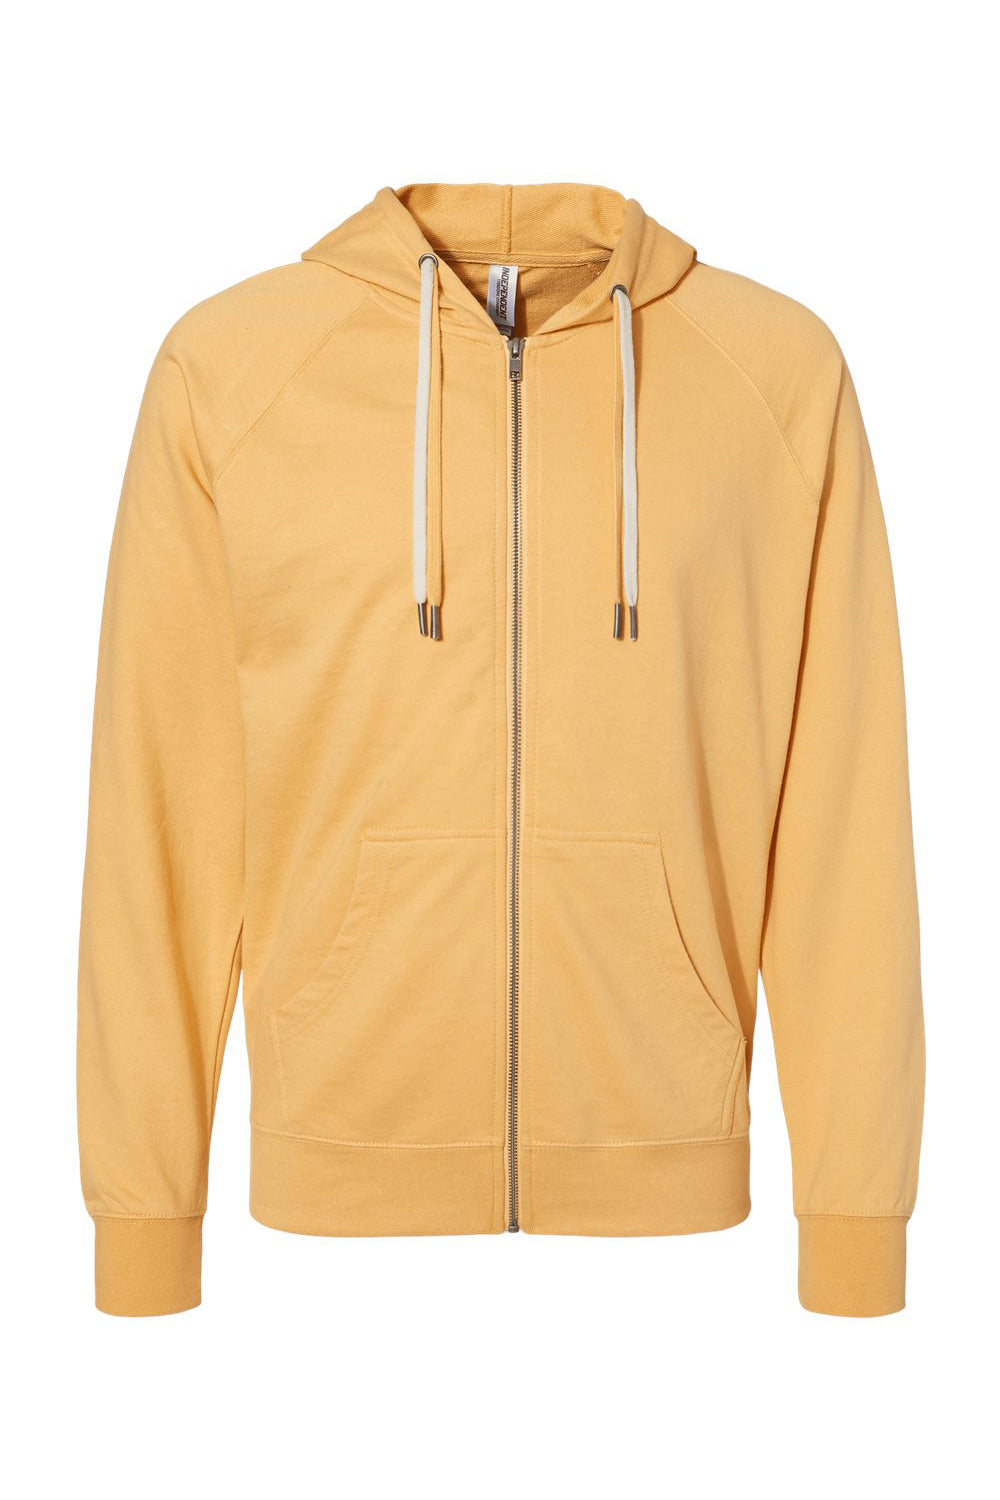 Independent Trading Co. SS1000Z Mens Icon Loopback Terry Full Zip Hooded Sweatshirt Hoodie Harvest Gold Flat Front